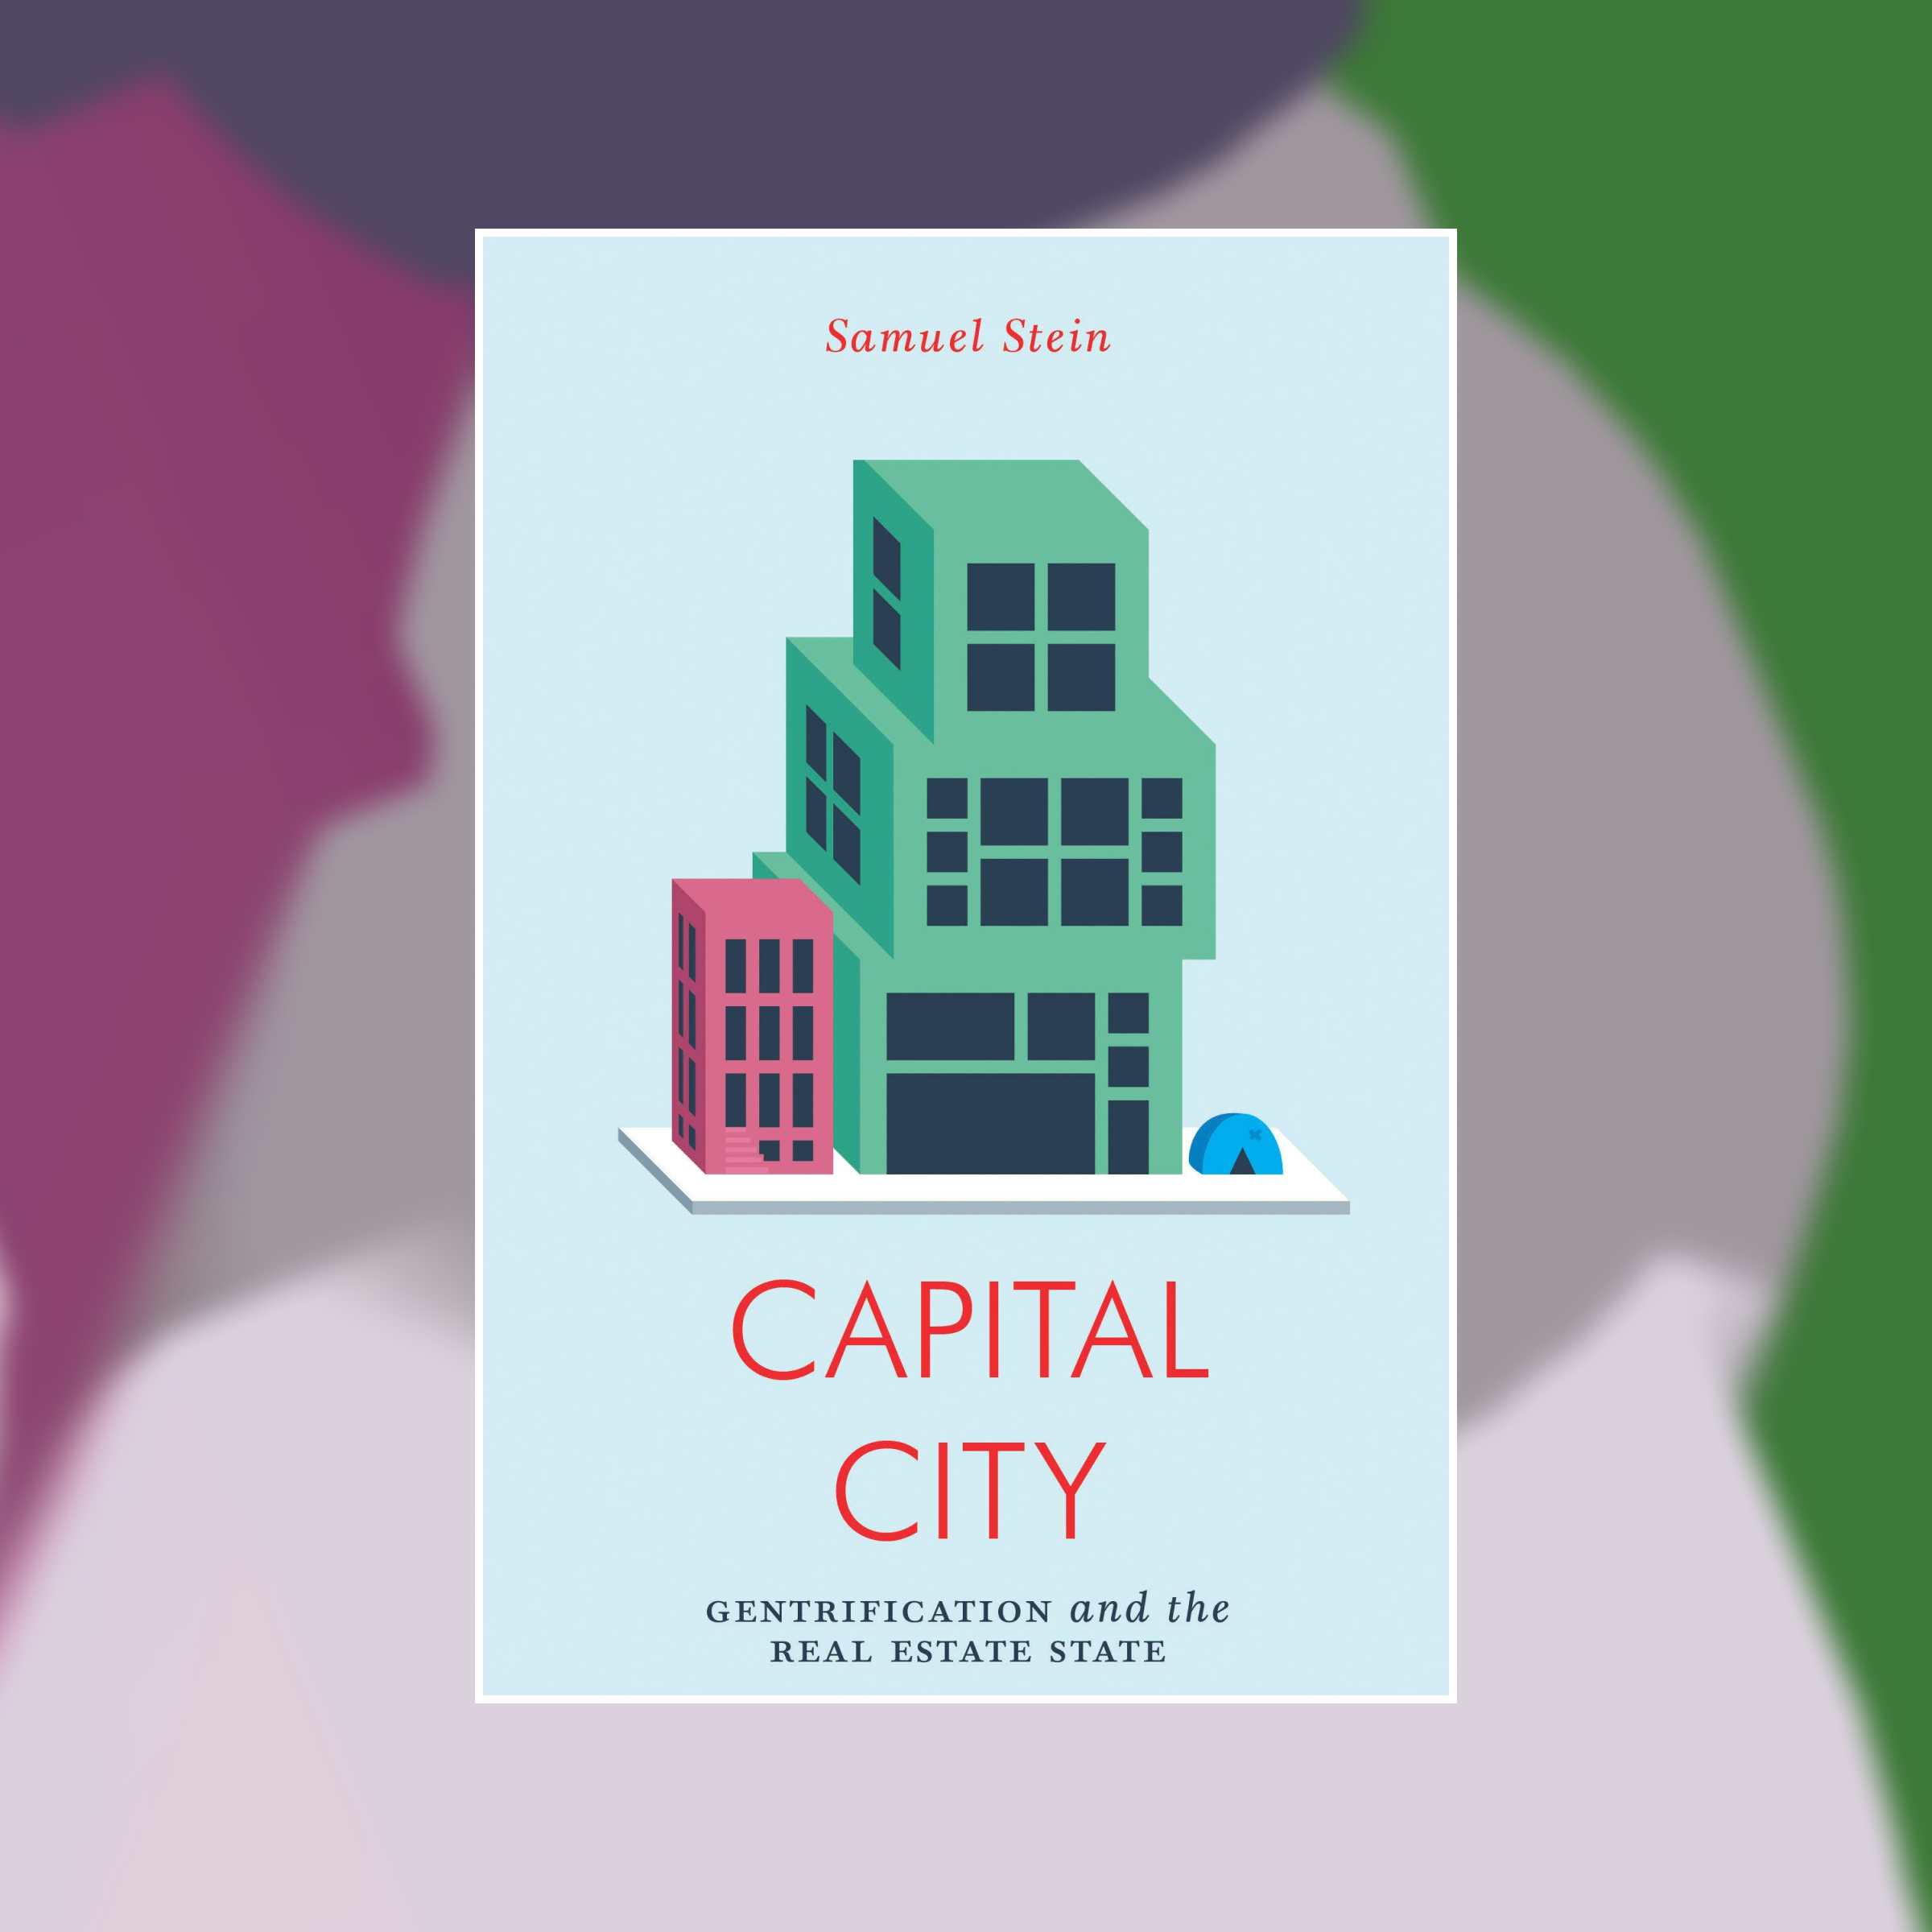 Book cover of Capital City against an abstract painted background